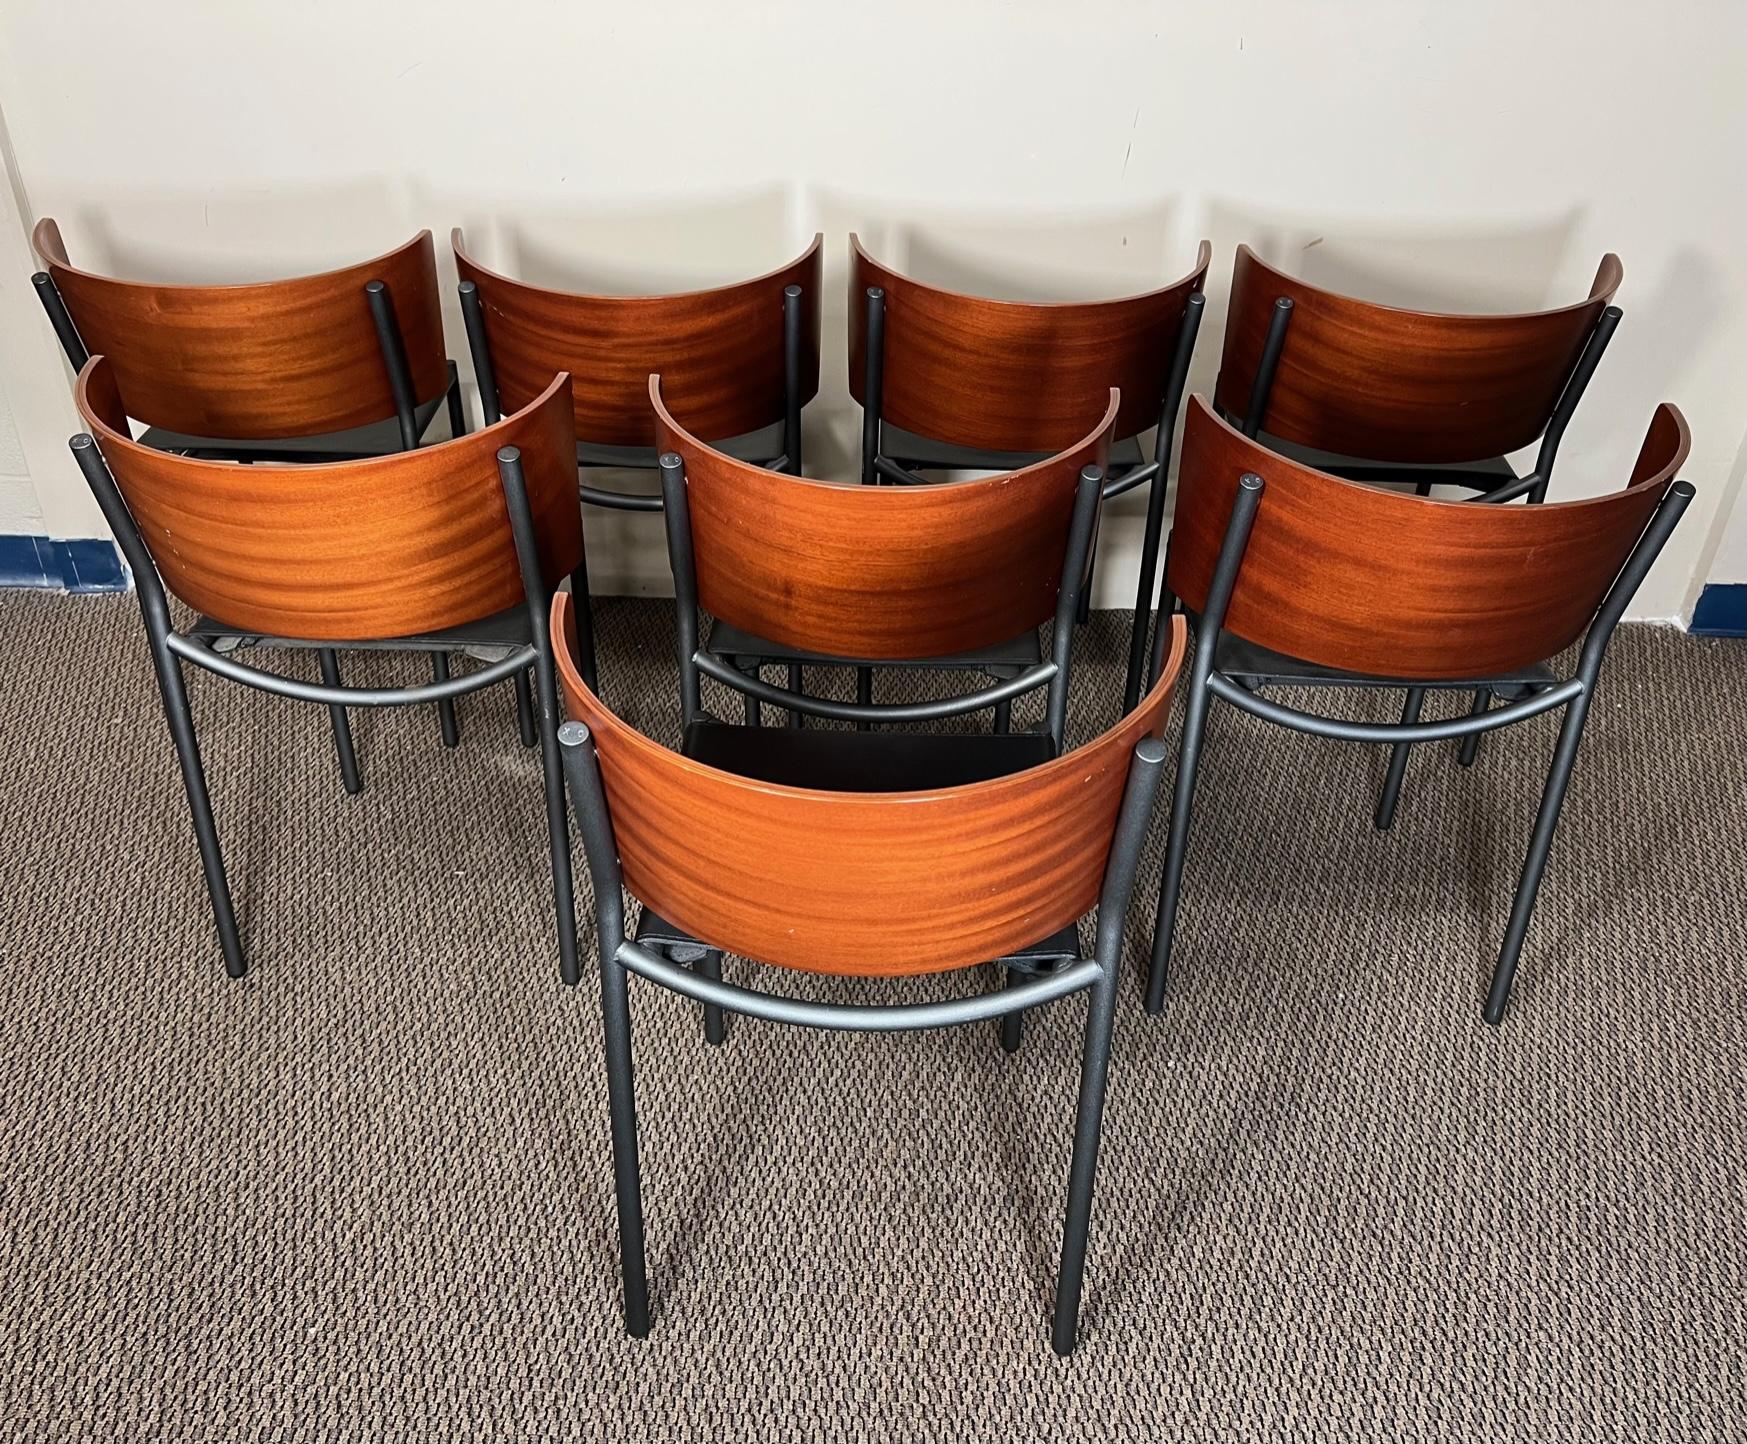 Beautiful set of 8 chairs with bent wood back and steel frames. Lila Hunter chairs by Philippe Starck for XO.

Very nice condition overall. All the chairs are very sturdy. Black leather seats. Some marks from normal use. One chair with a small